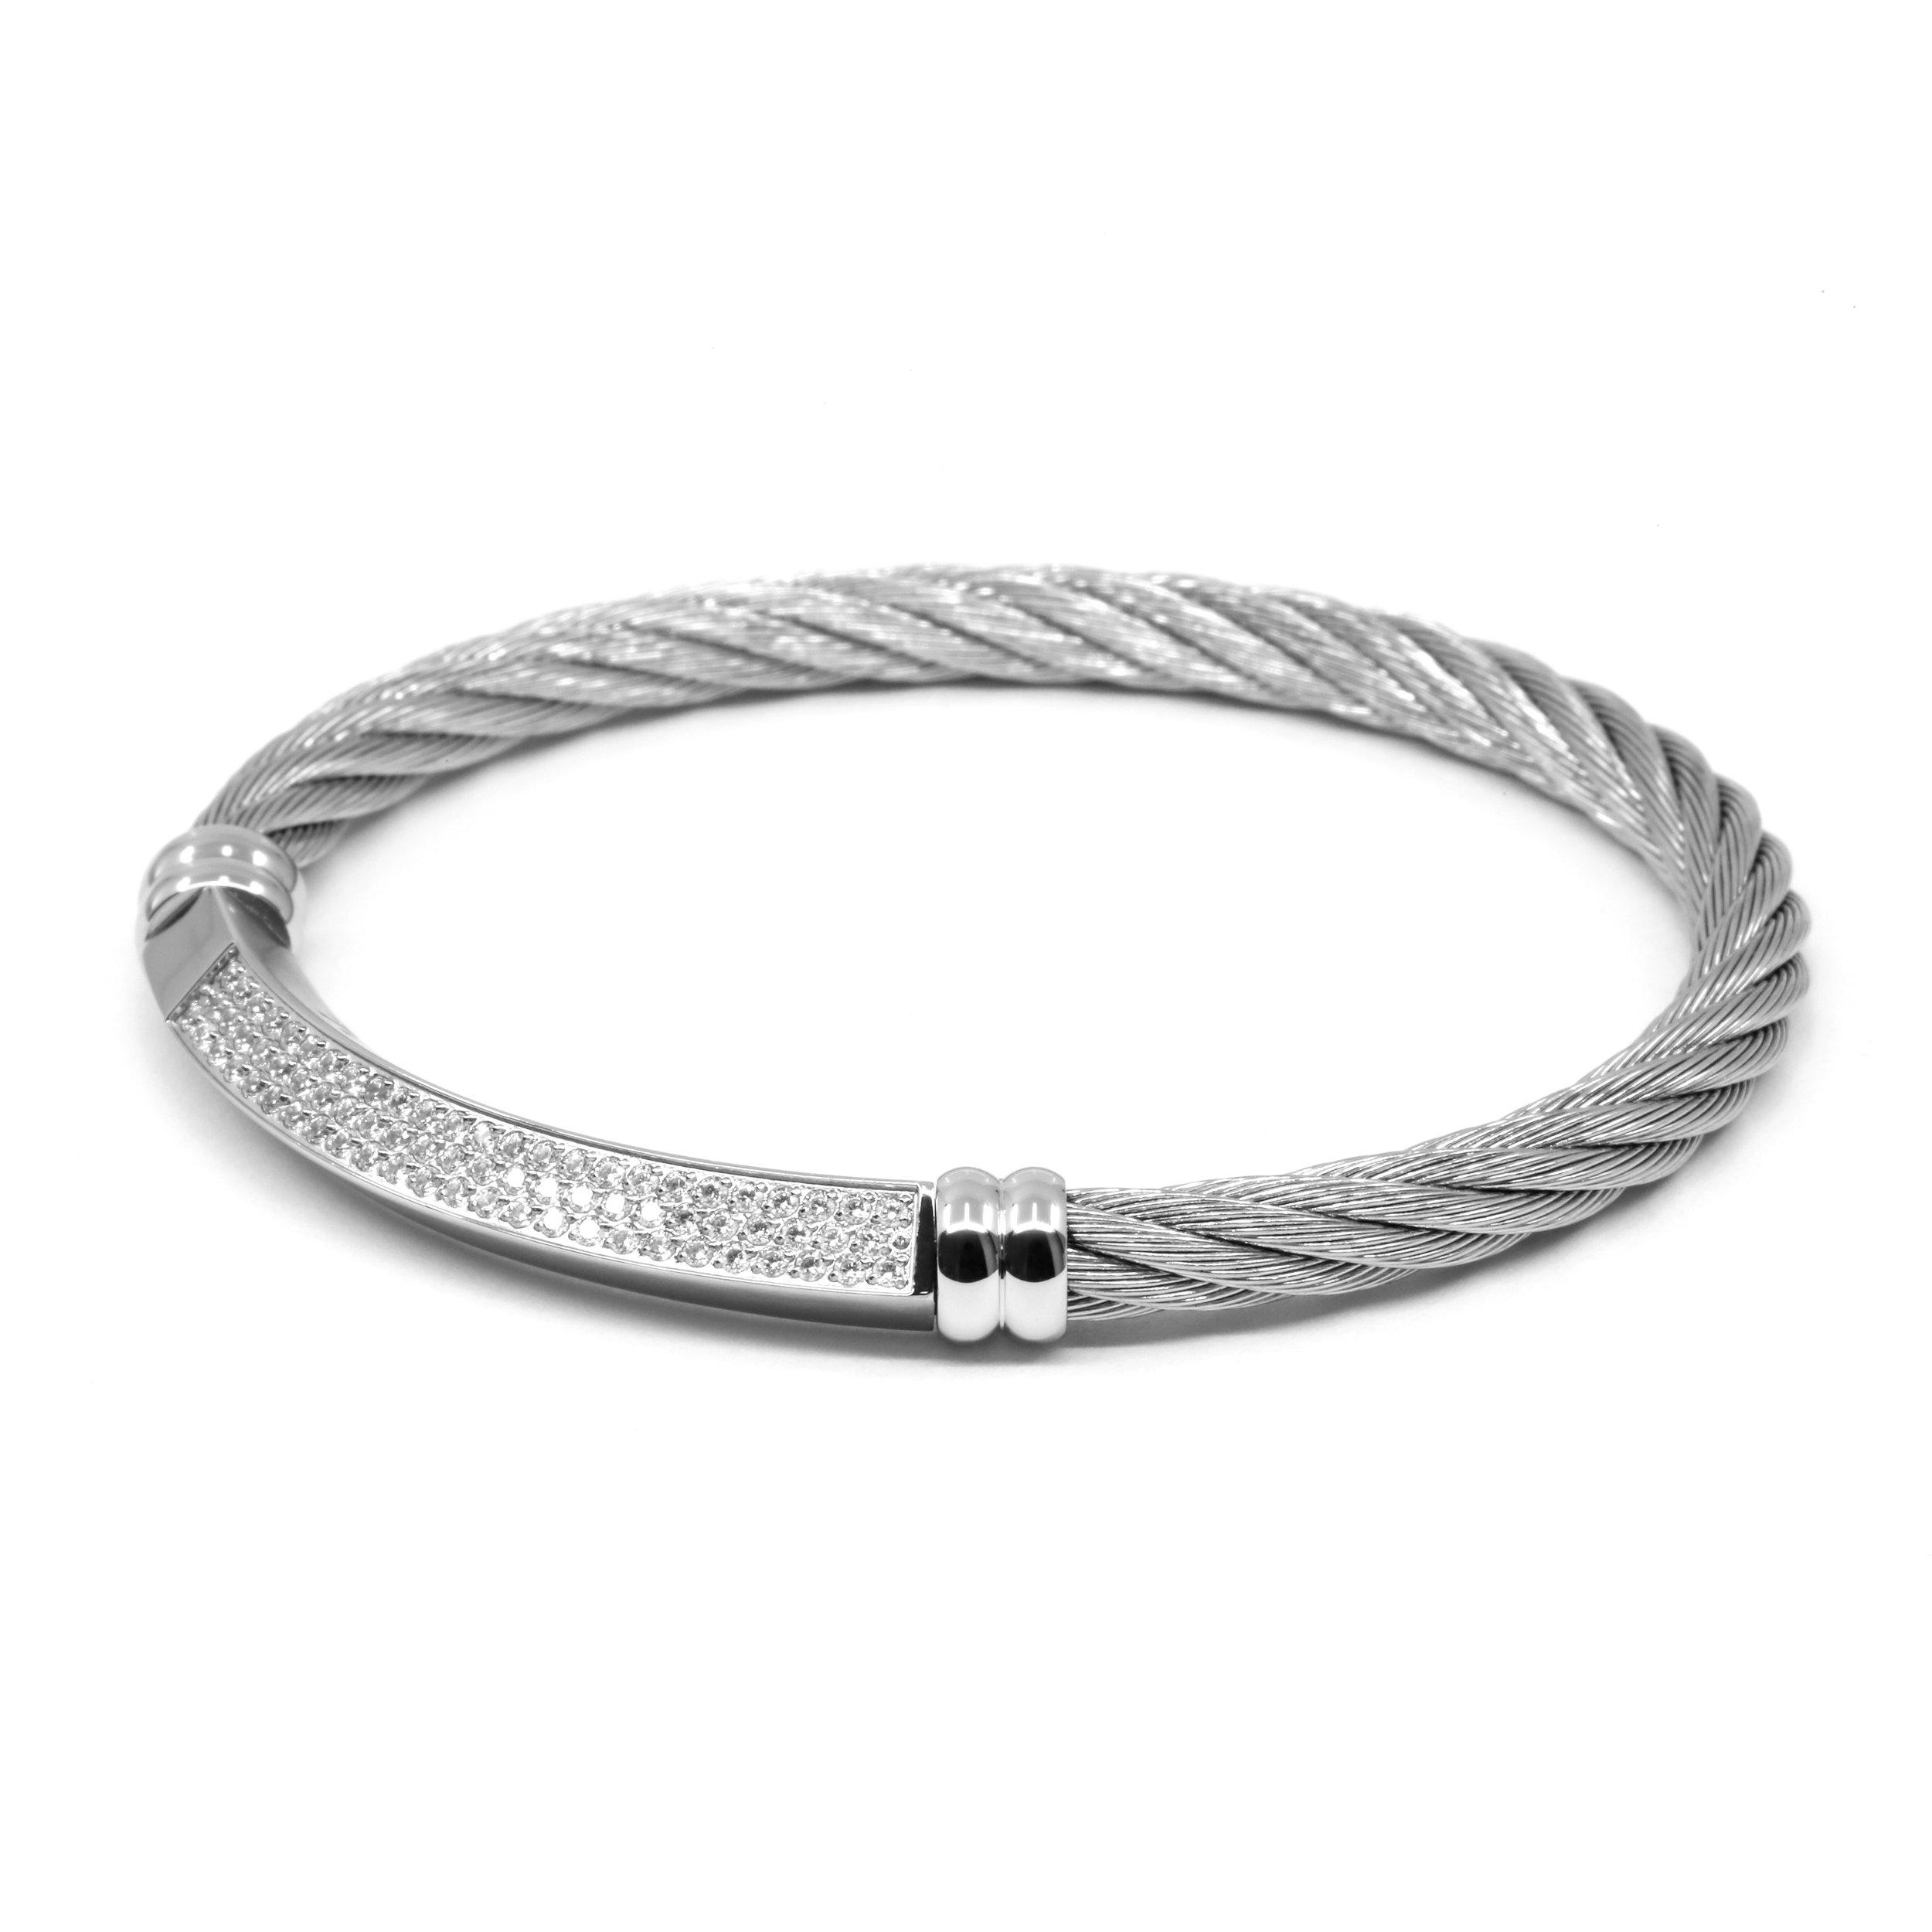 Better Half Bangle - Stainless Steel Decor, CZ stones, Stainless Steel Cable.jpg